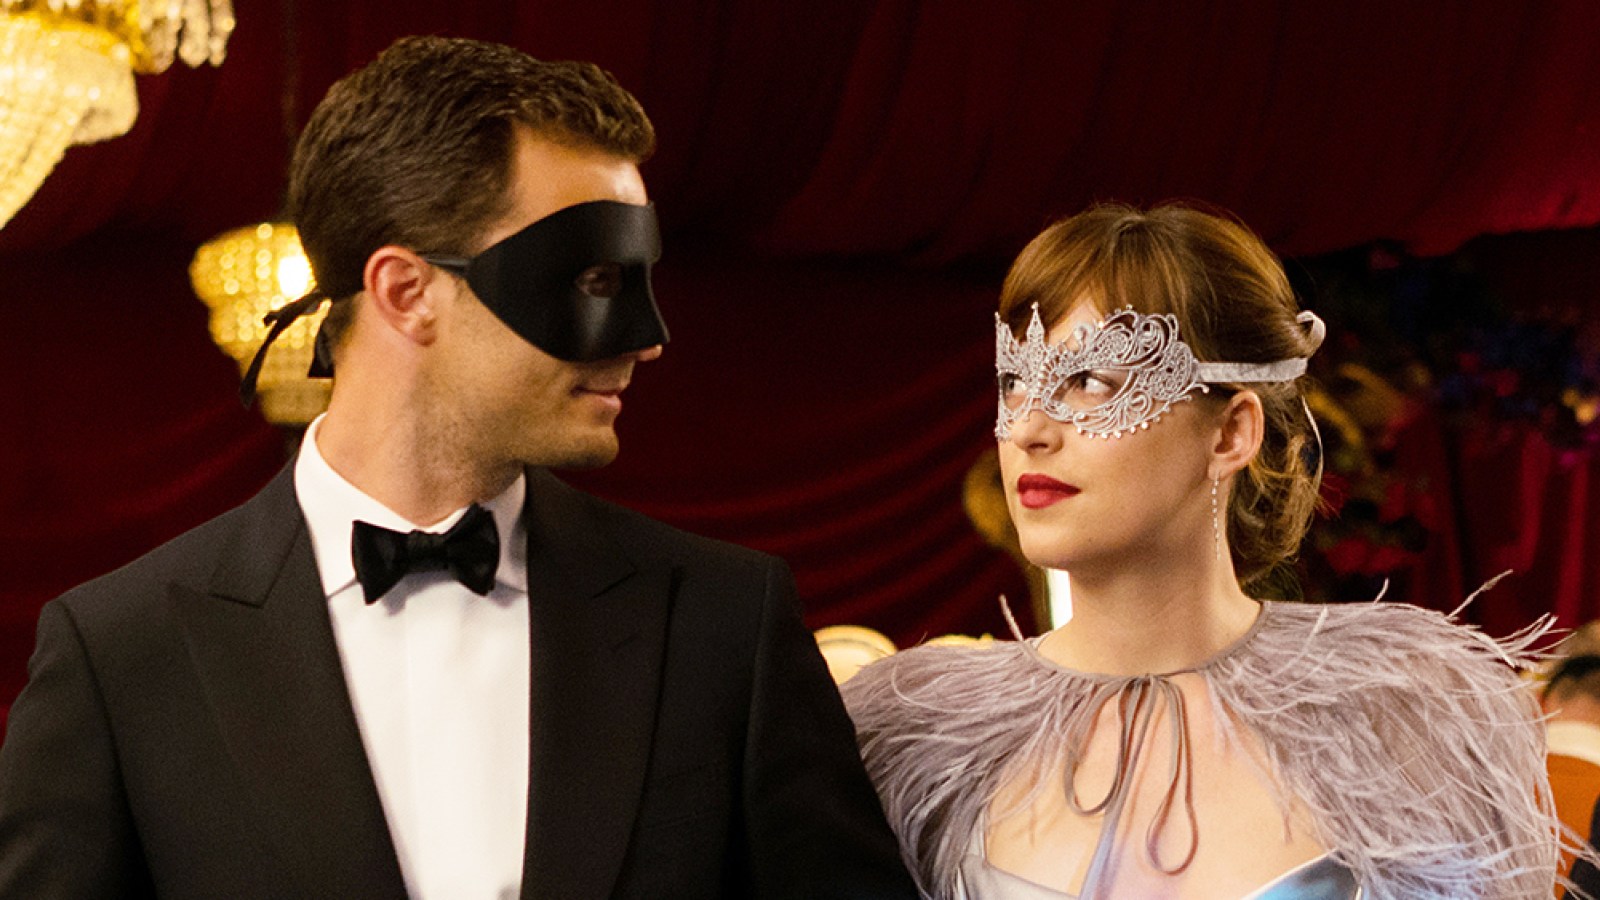 Movies Like Fifty Shades Of Grey And 365 Days